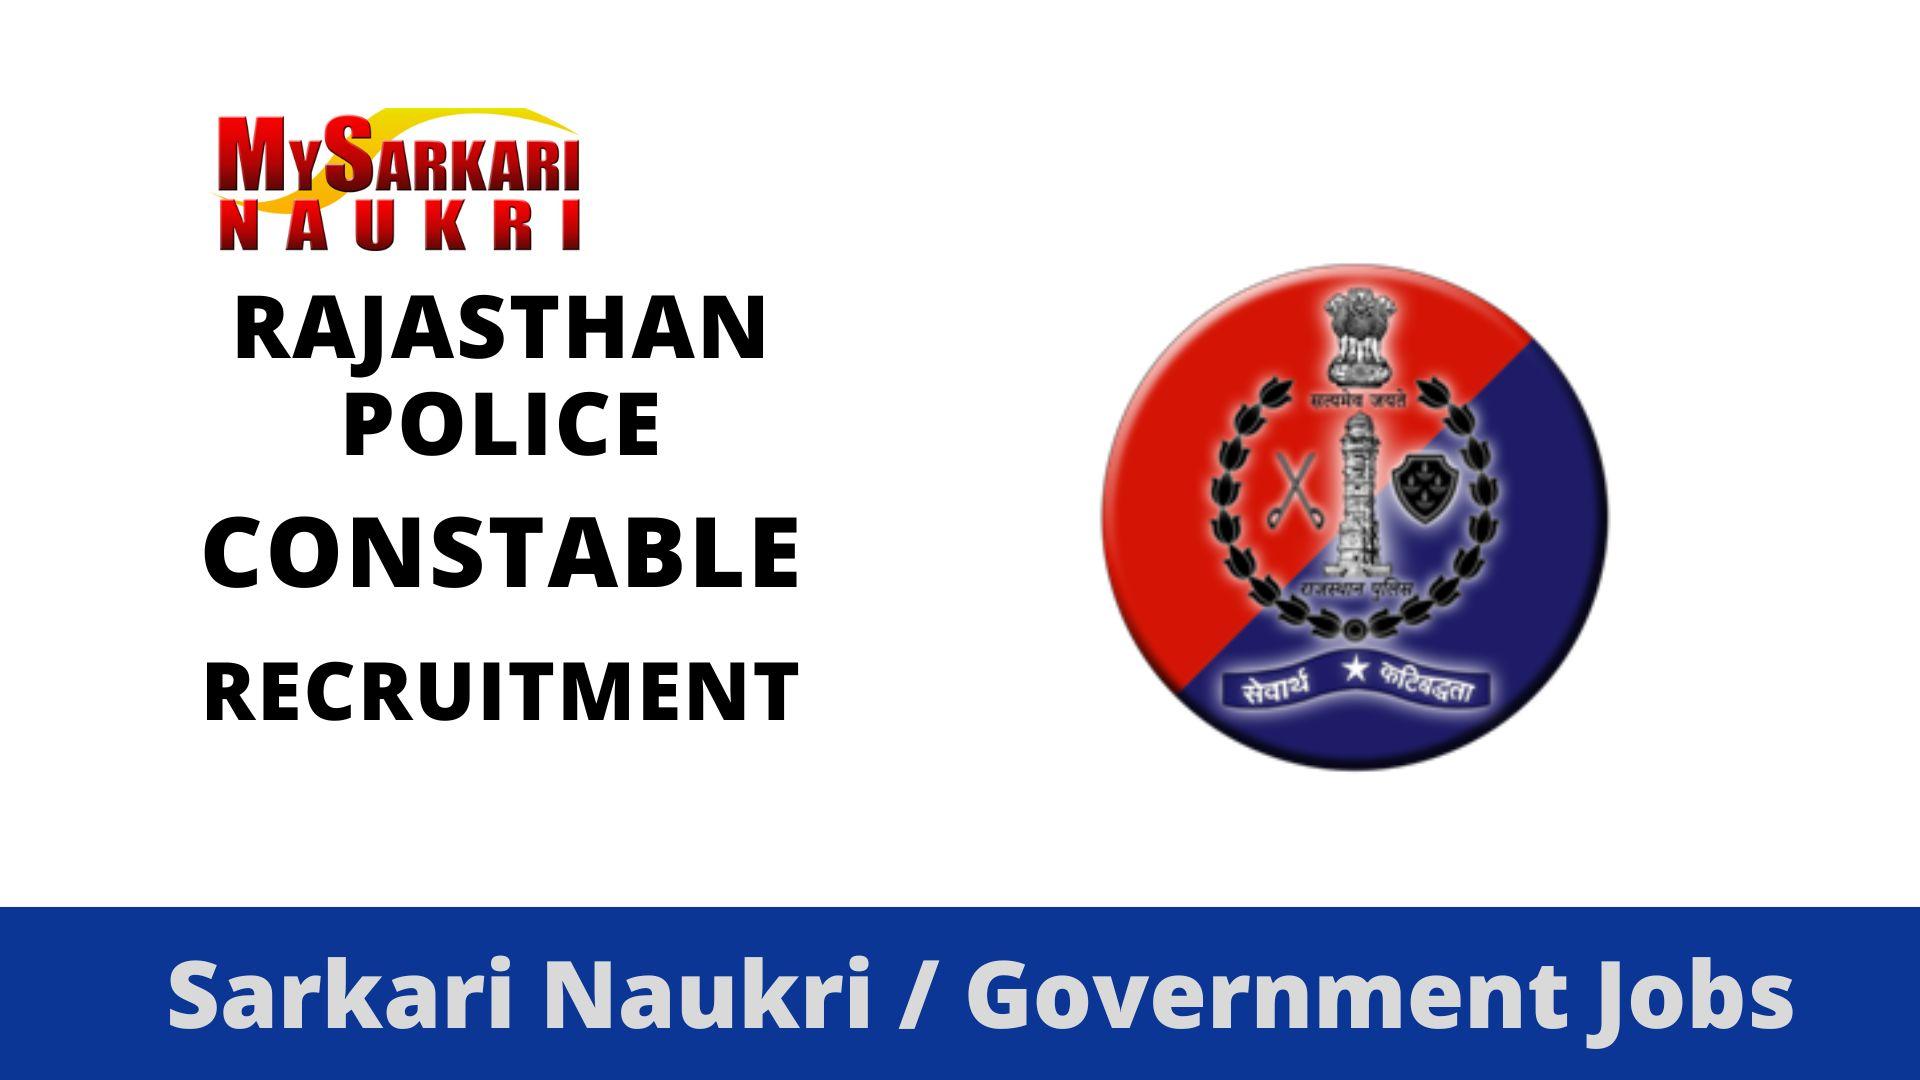 Search: rajasthan police Logo PNG Vectors Free Download - Page 8